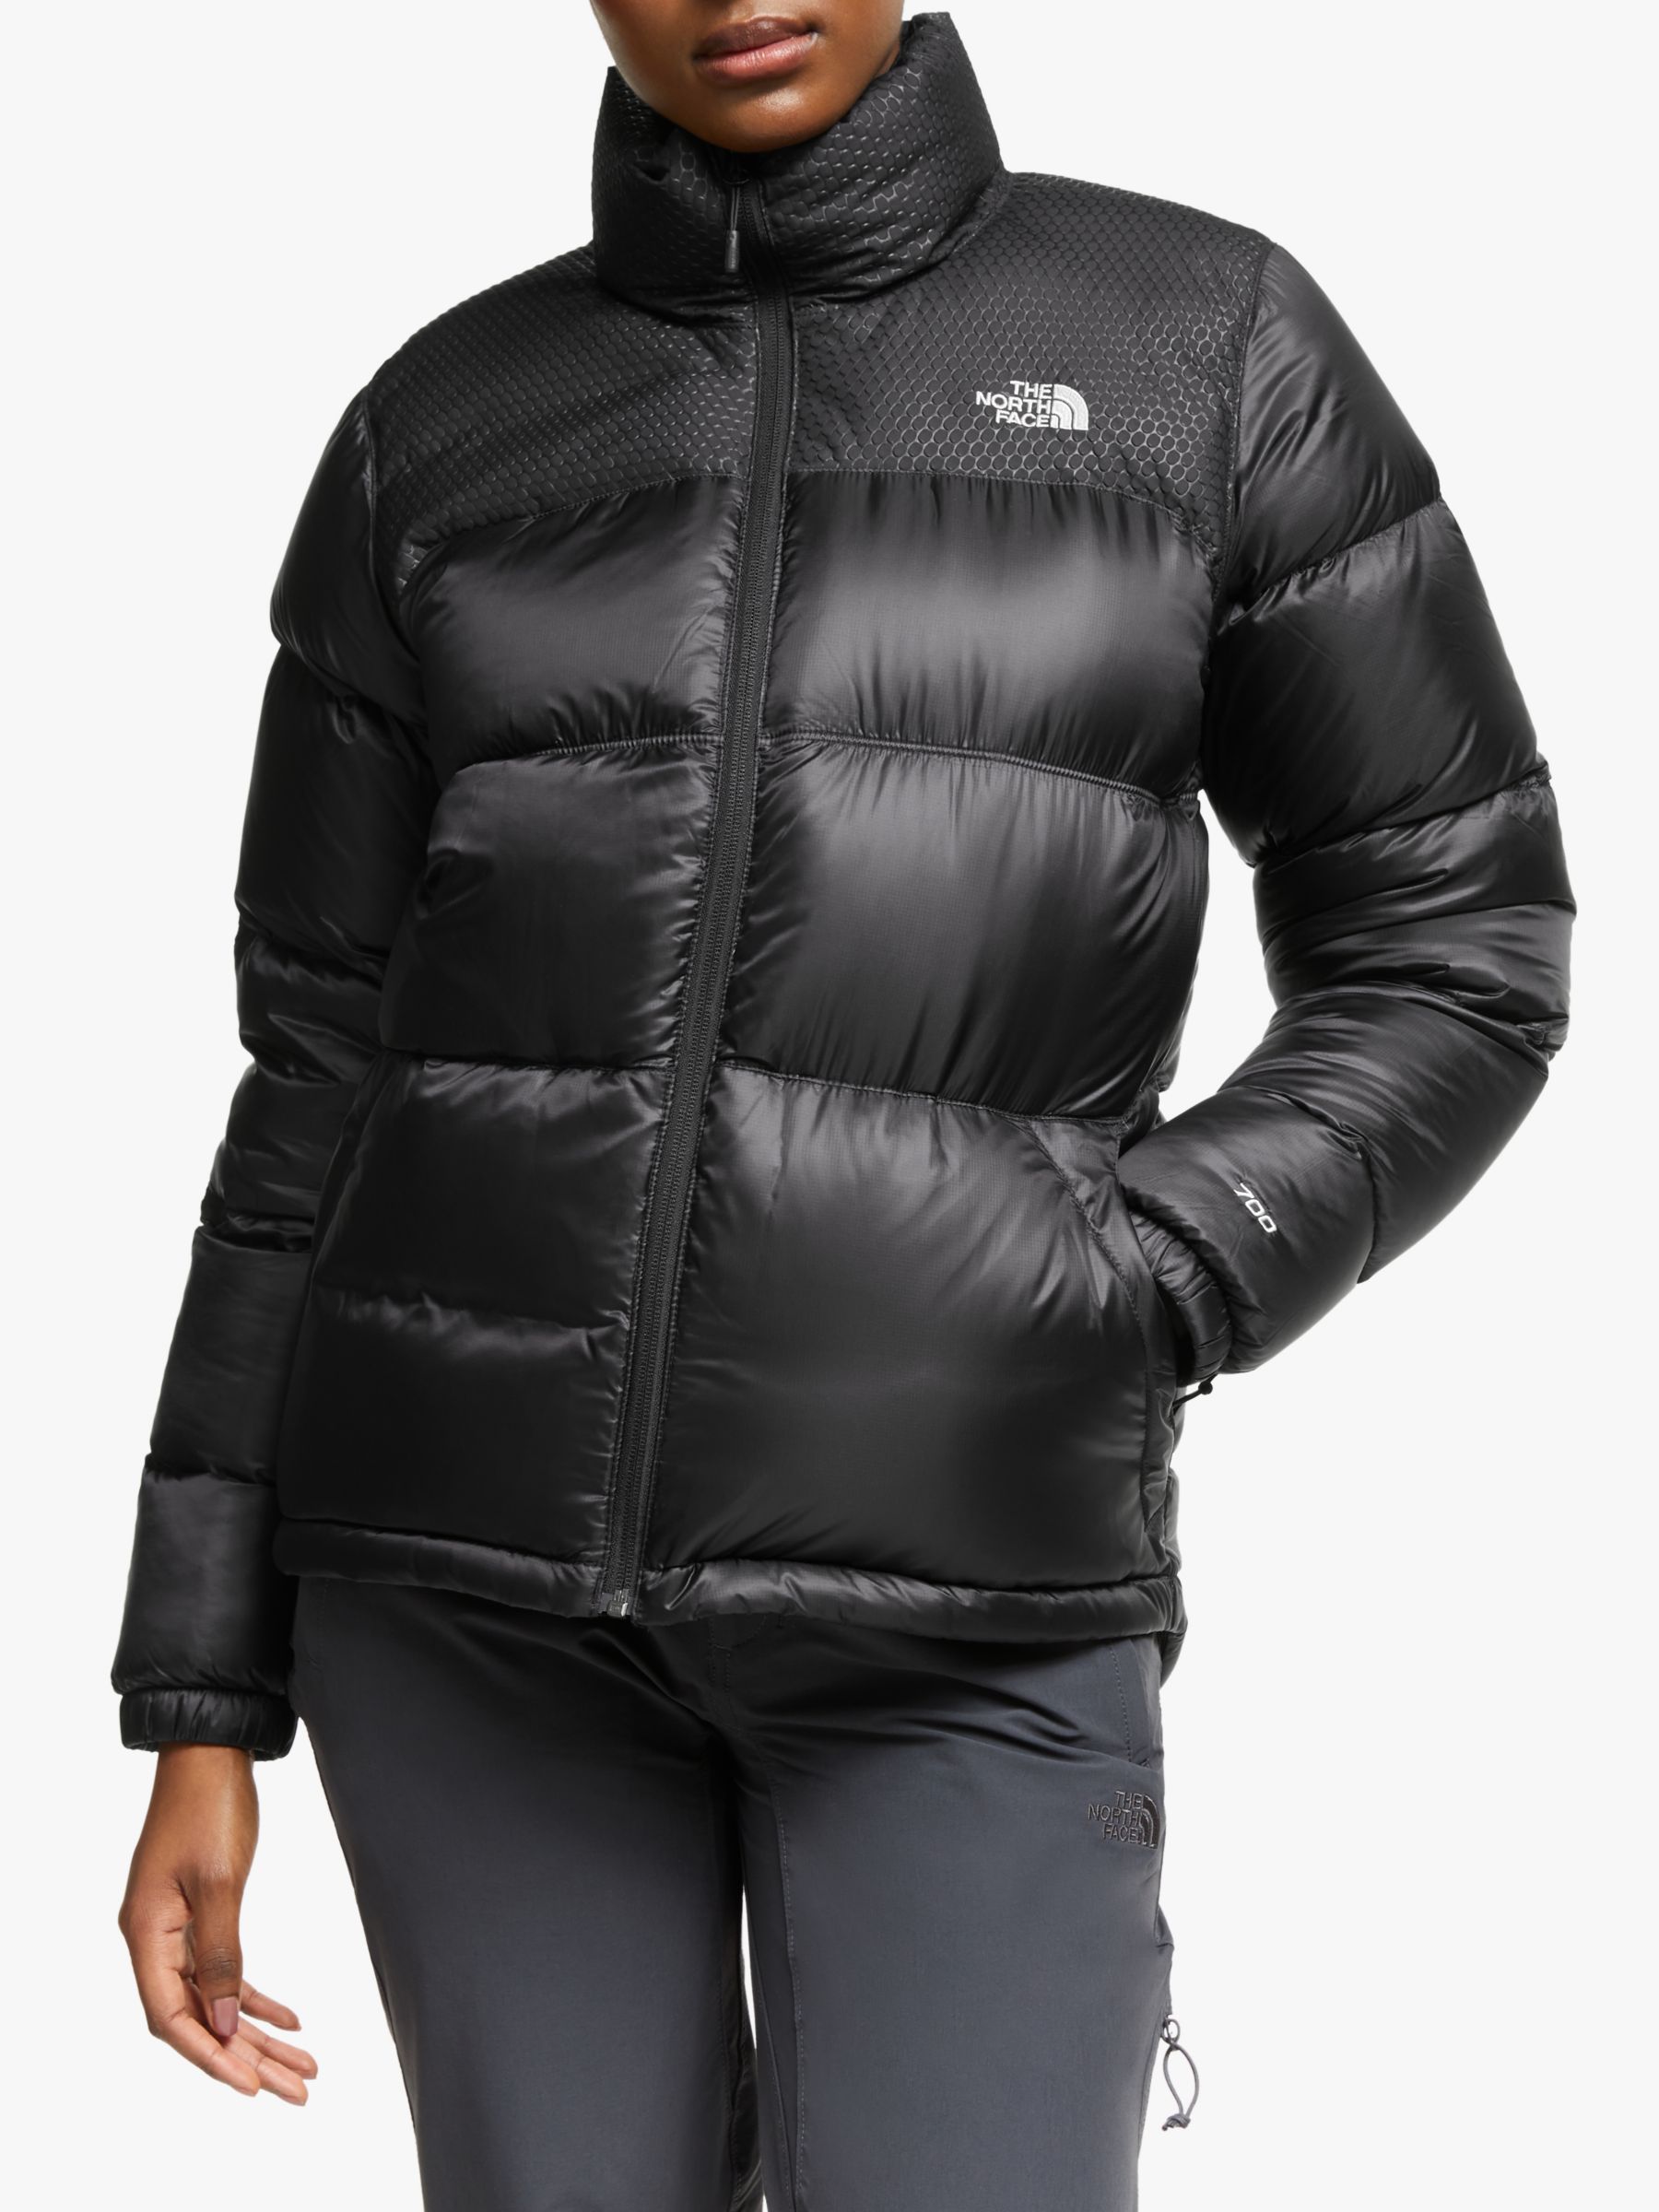 north face black down jacket women's